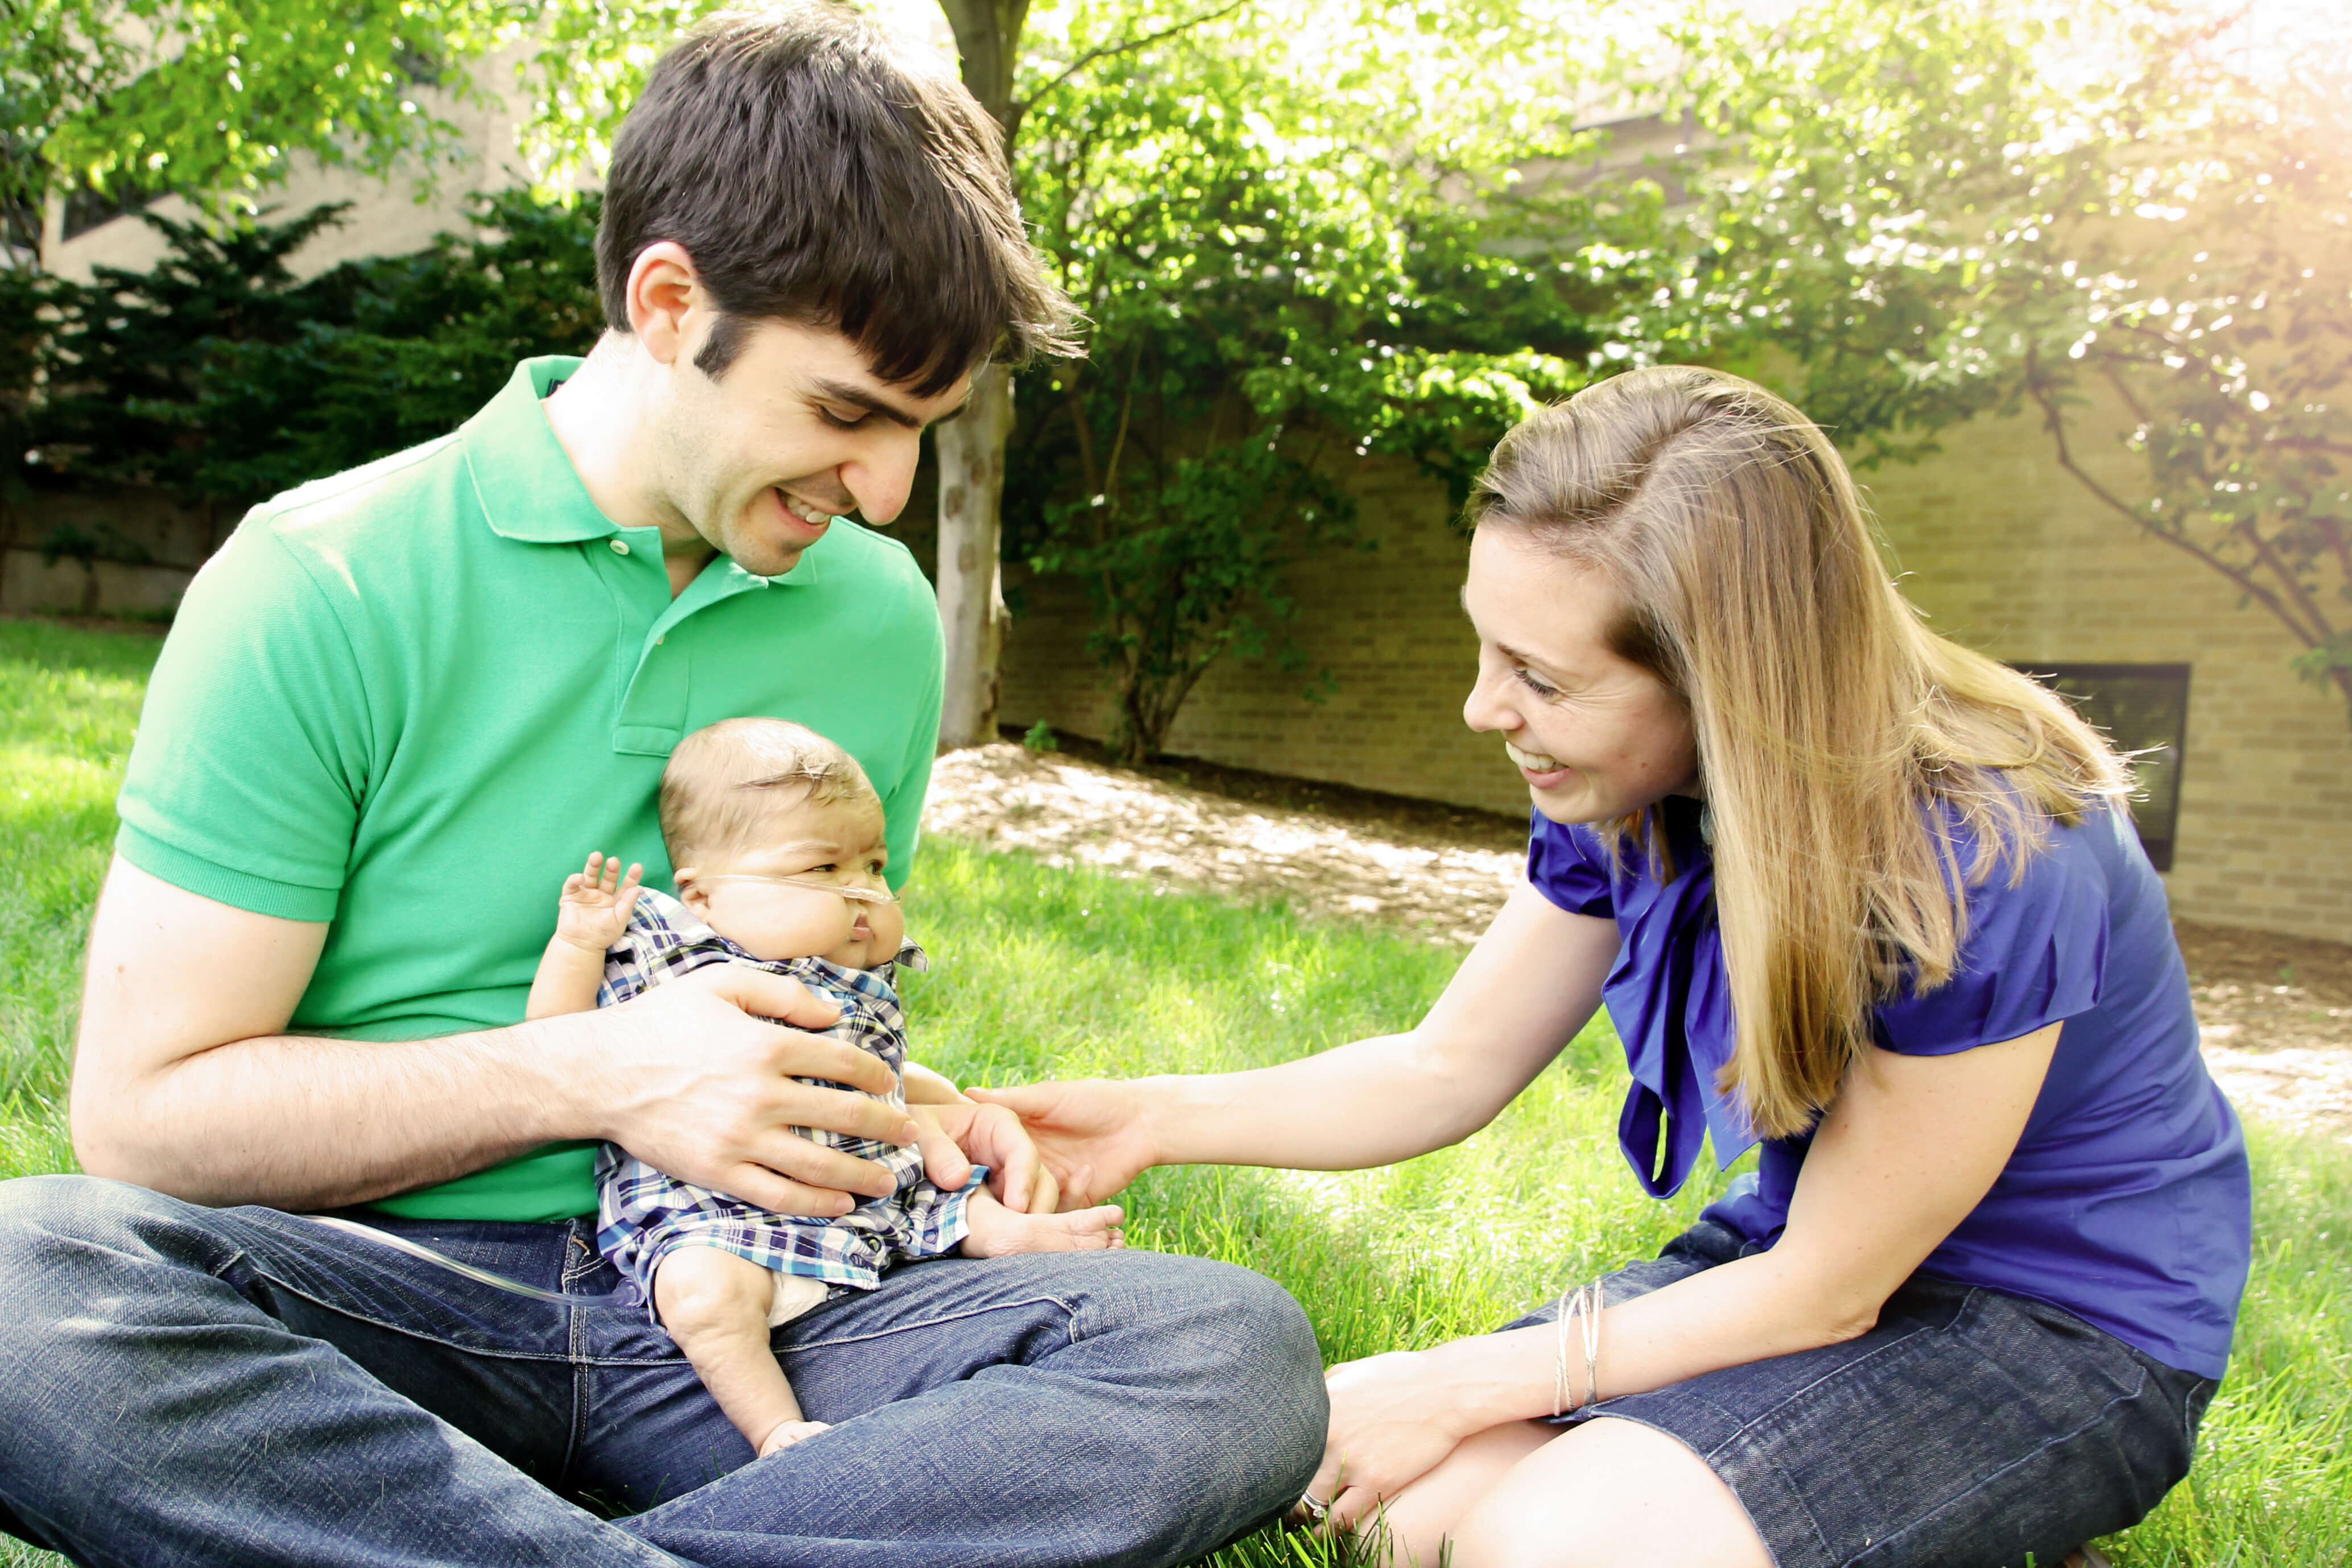 Noah Canvasser (left), son Micah Canvasser (middle), and Jennifer Canvasser play outside on the grass